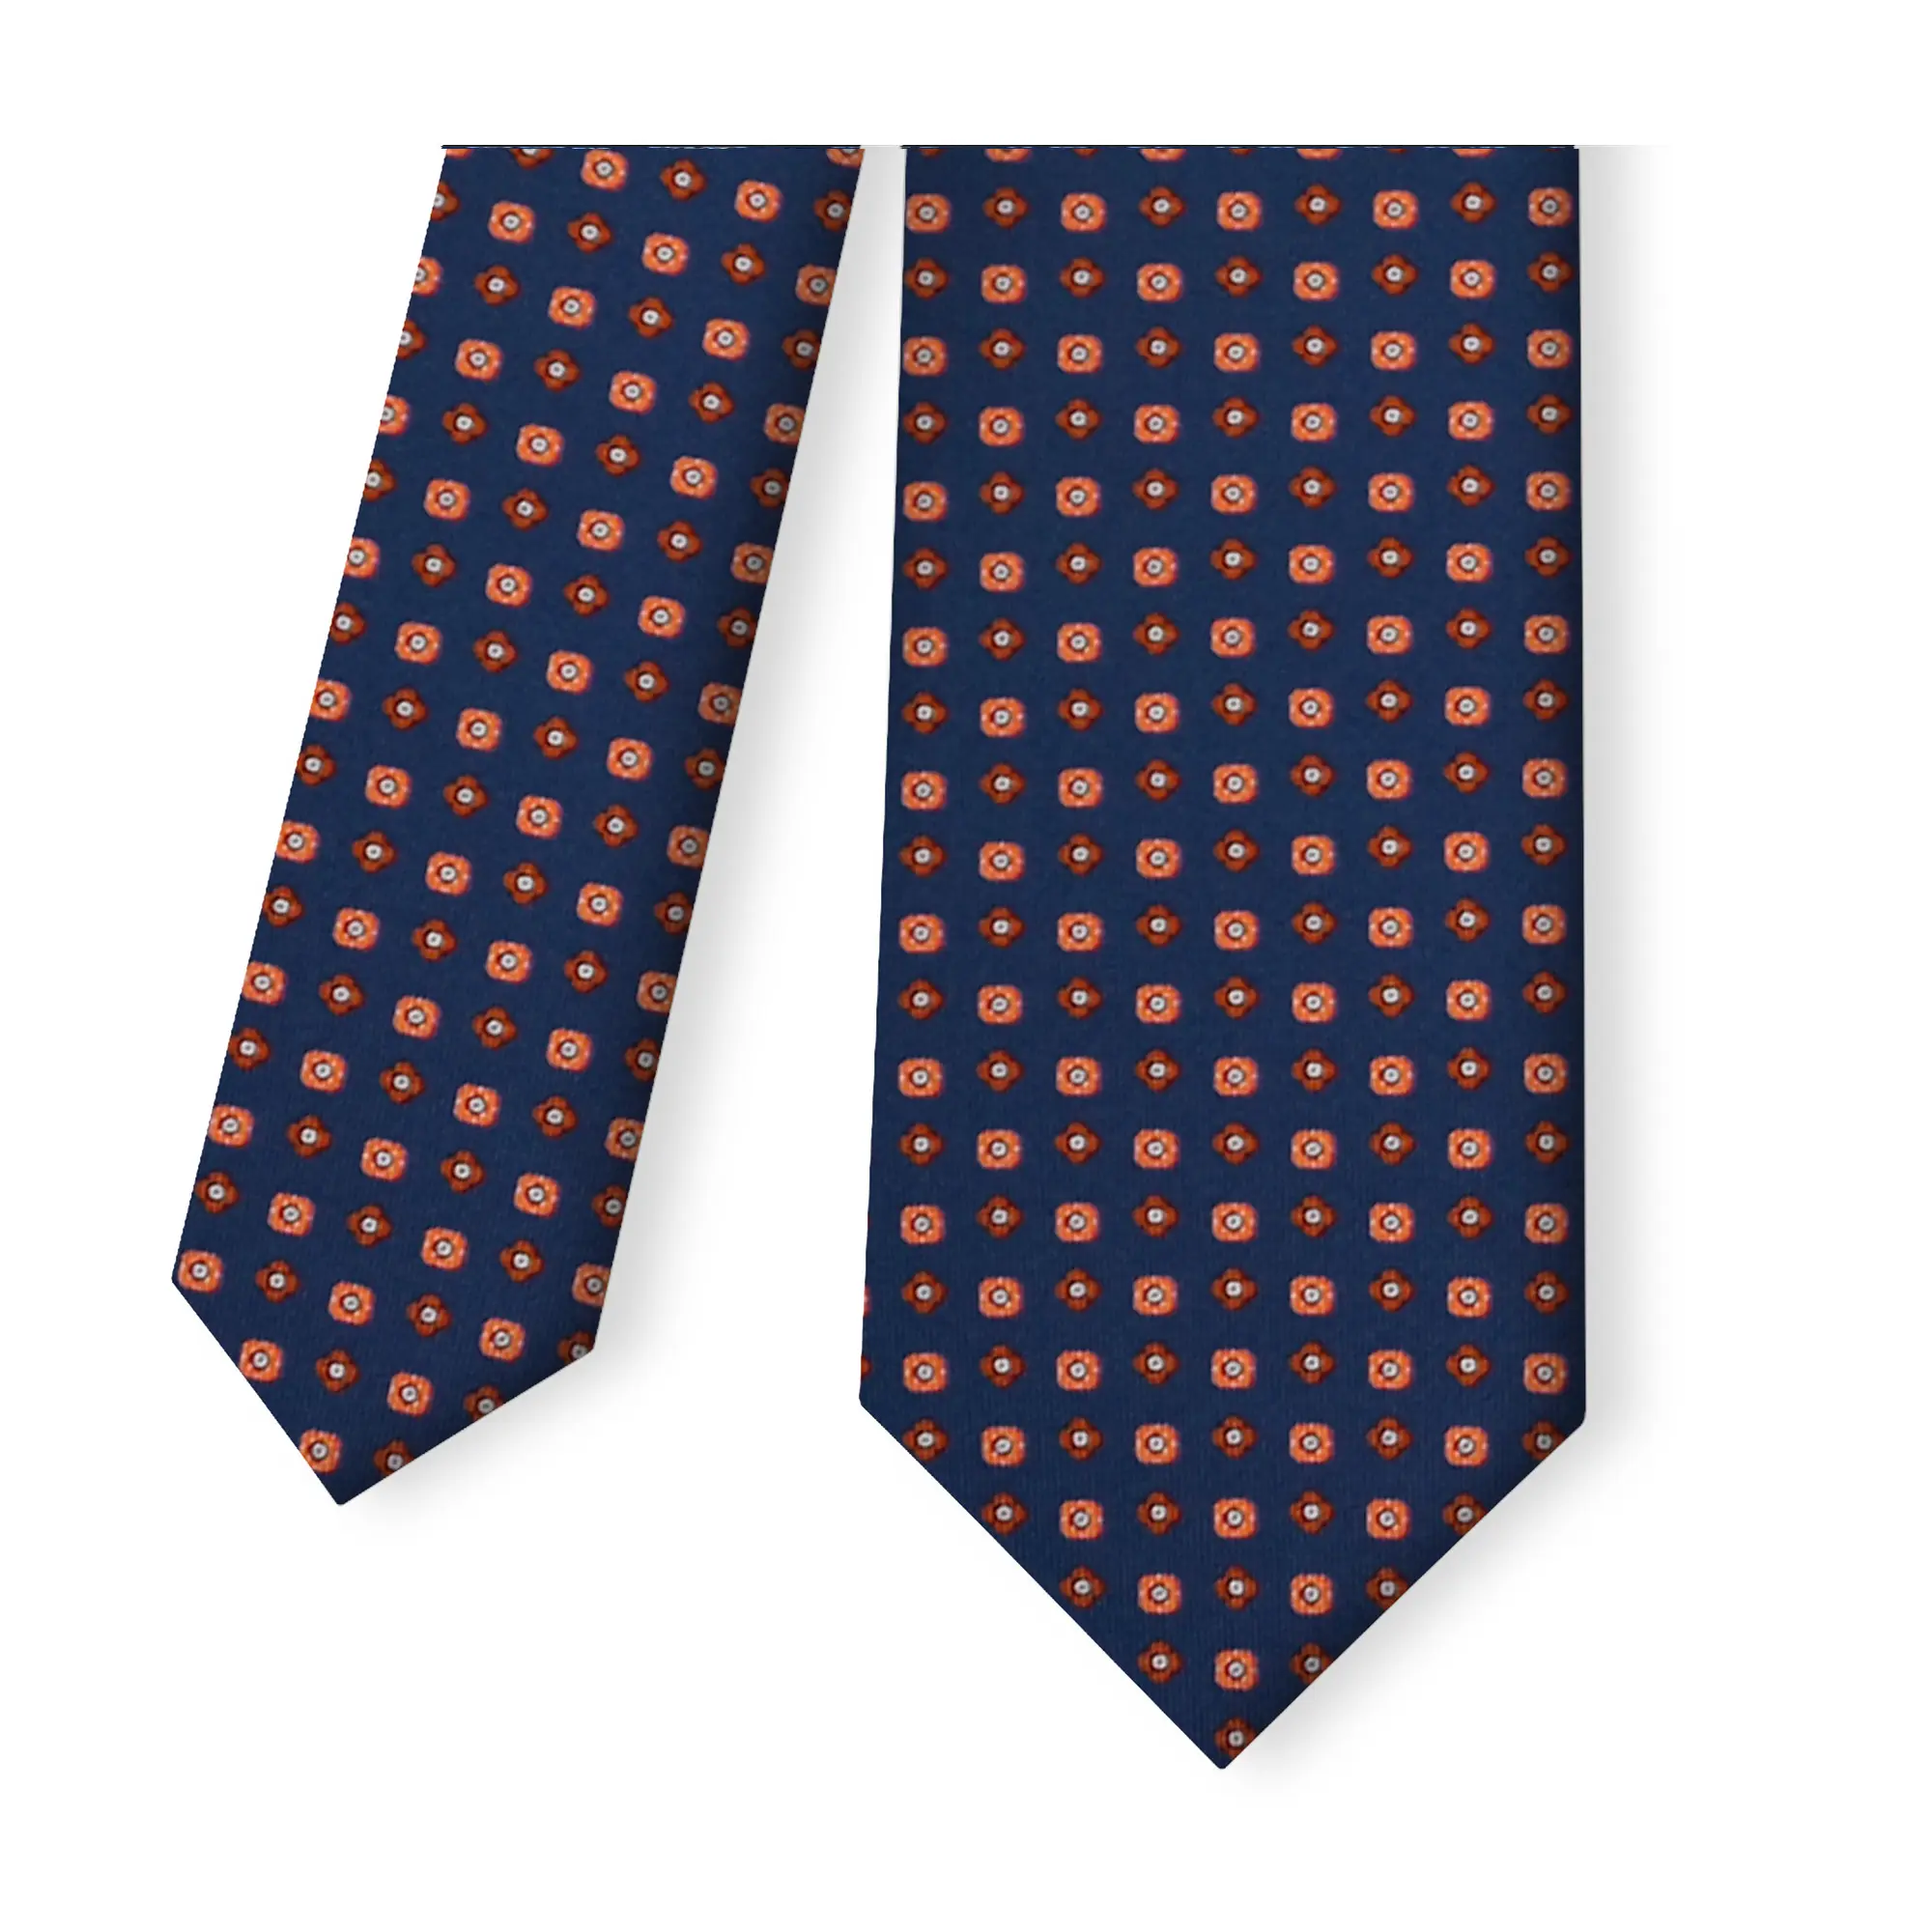 Top Quality Product Silk Tie Orange And Navy Blue Timeless Man Accessories Gift Idea For Wedding Anniversary